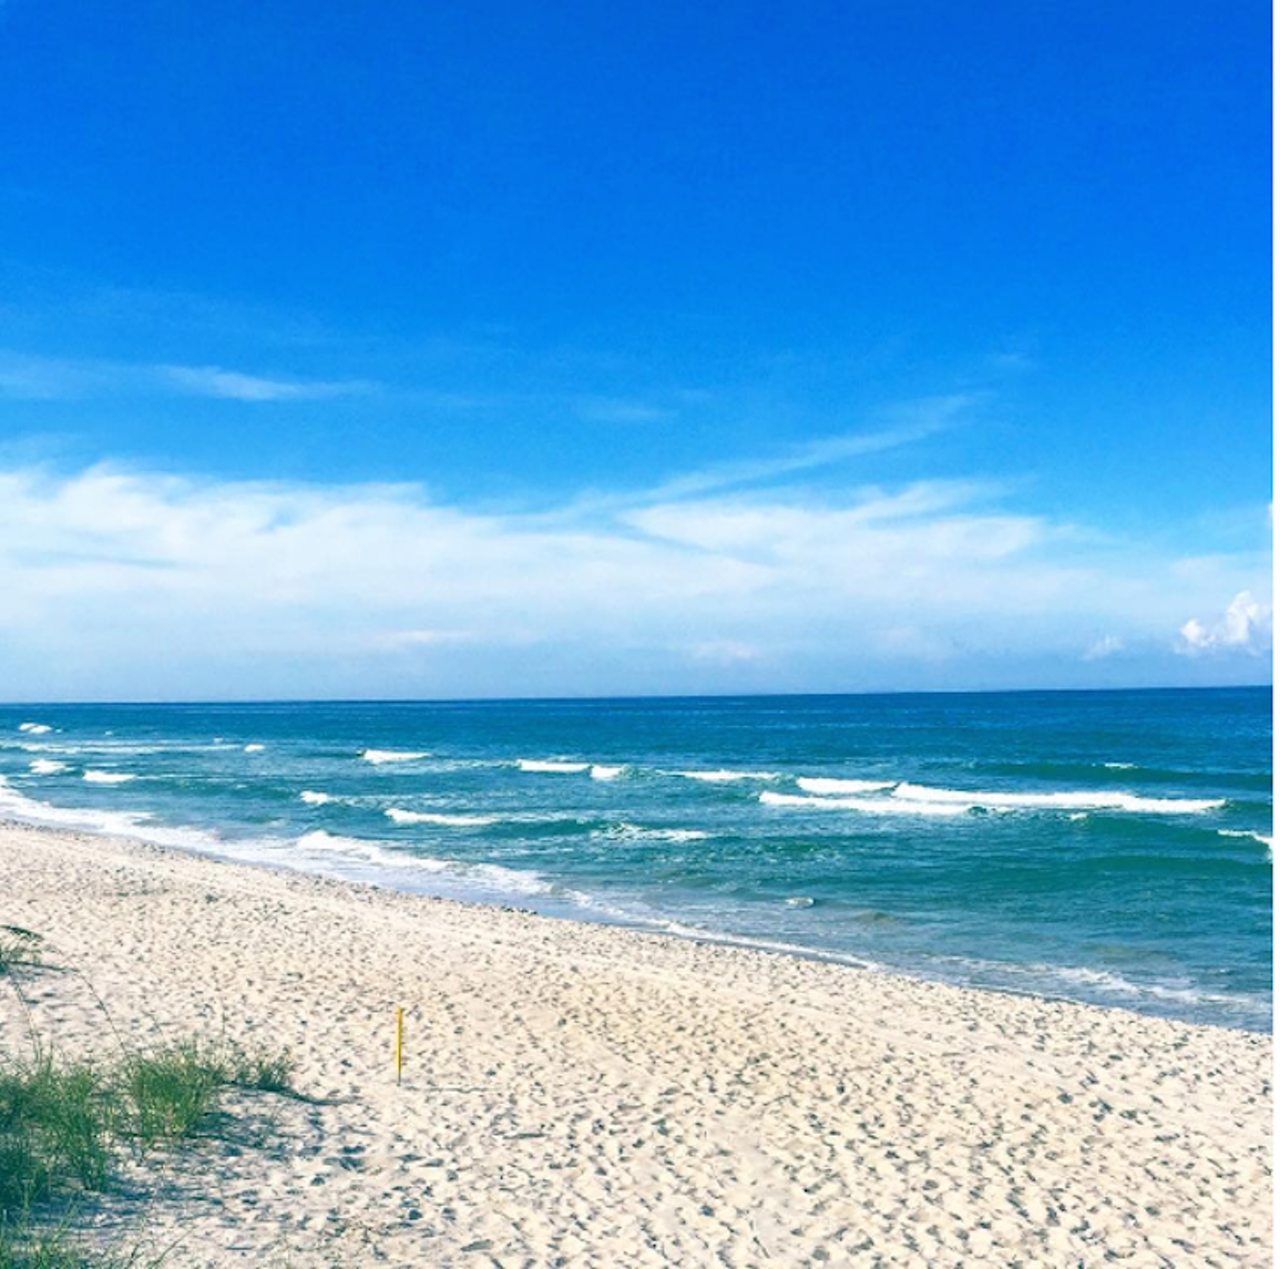 Go &#147;suns out, buns out&#148; at Playalinda nude beach
Canaveral National Seashore, Titusville, 321-267-1110 
Playalinda beach on Florida&#146;s space coast is a popular place for locals and tourists to bear it all. Not only is the beach fairly remote, it also offers really pretty views. Nudity only allowed in certain areas. 
Photo via steve_torres111/Instagram